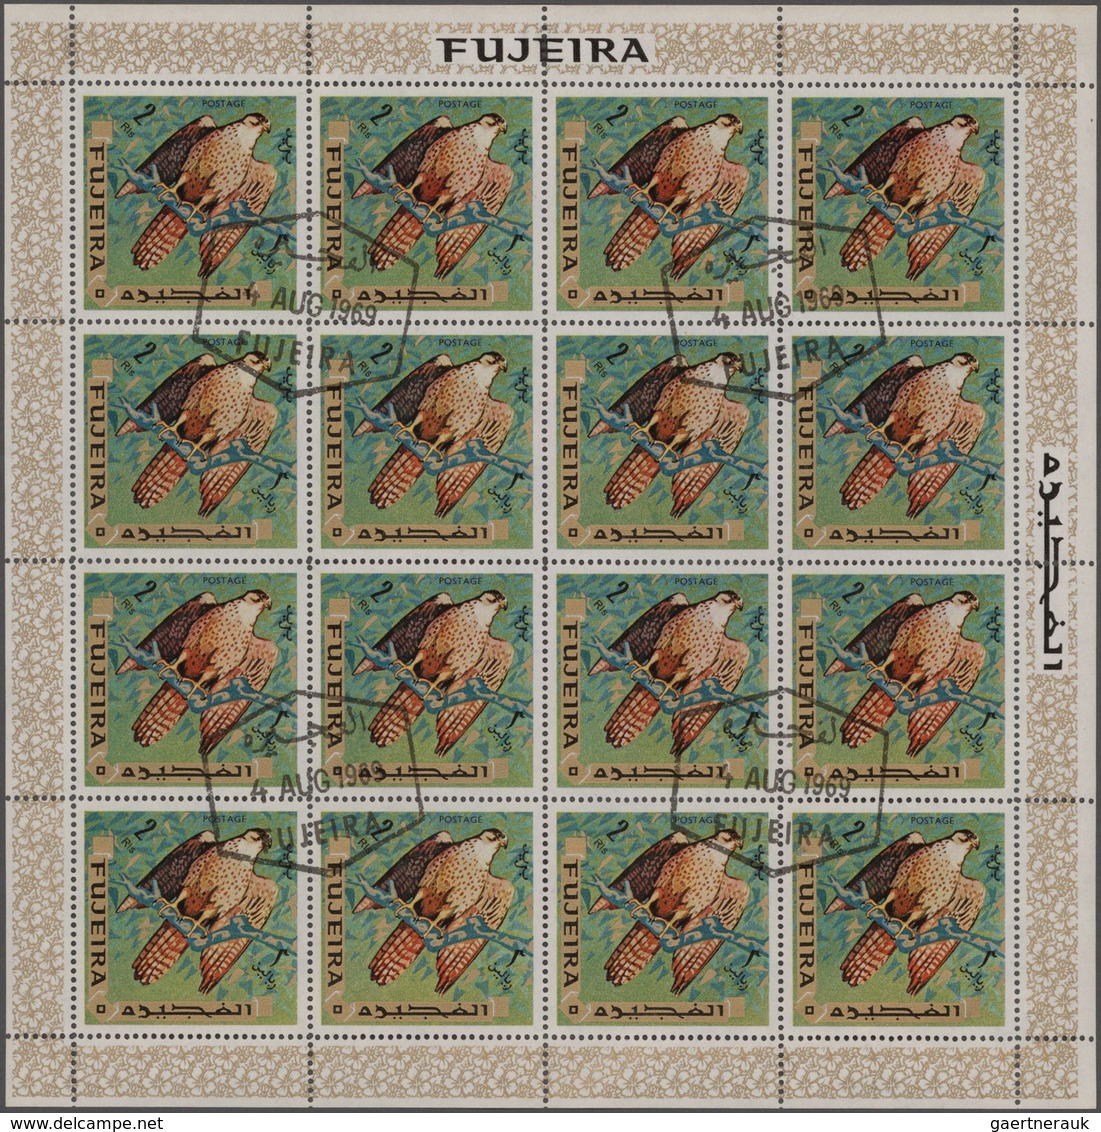 Fudschaira / Fujeira: 1965/1969 (ca.), Enormous Stock Of Used Perforated And Imperforated Stamps Wit - Fudschaira